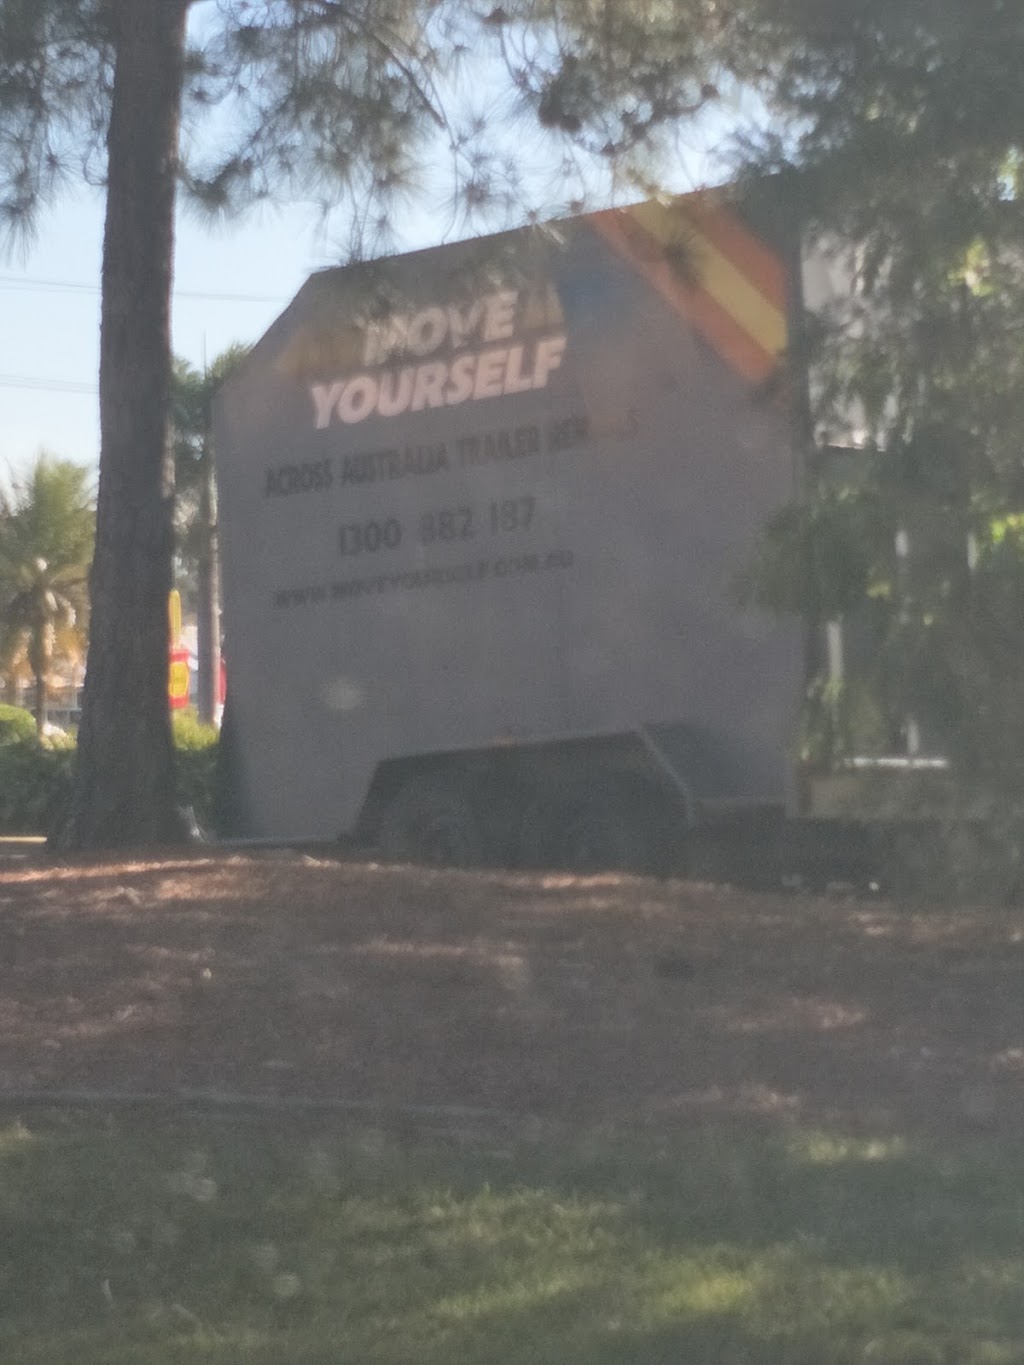 Move Yourself - Deception Bay QLD (376Cnr Park &) Opening Hours